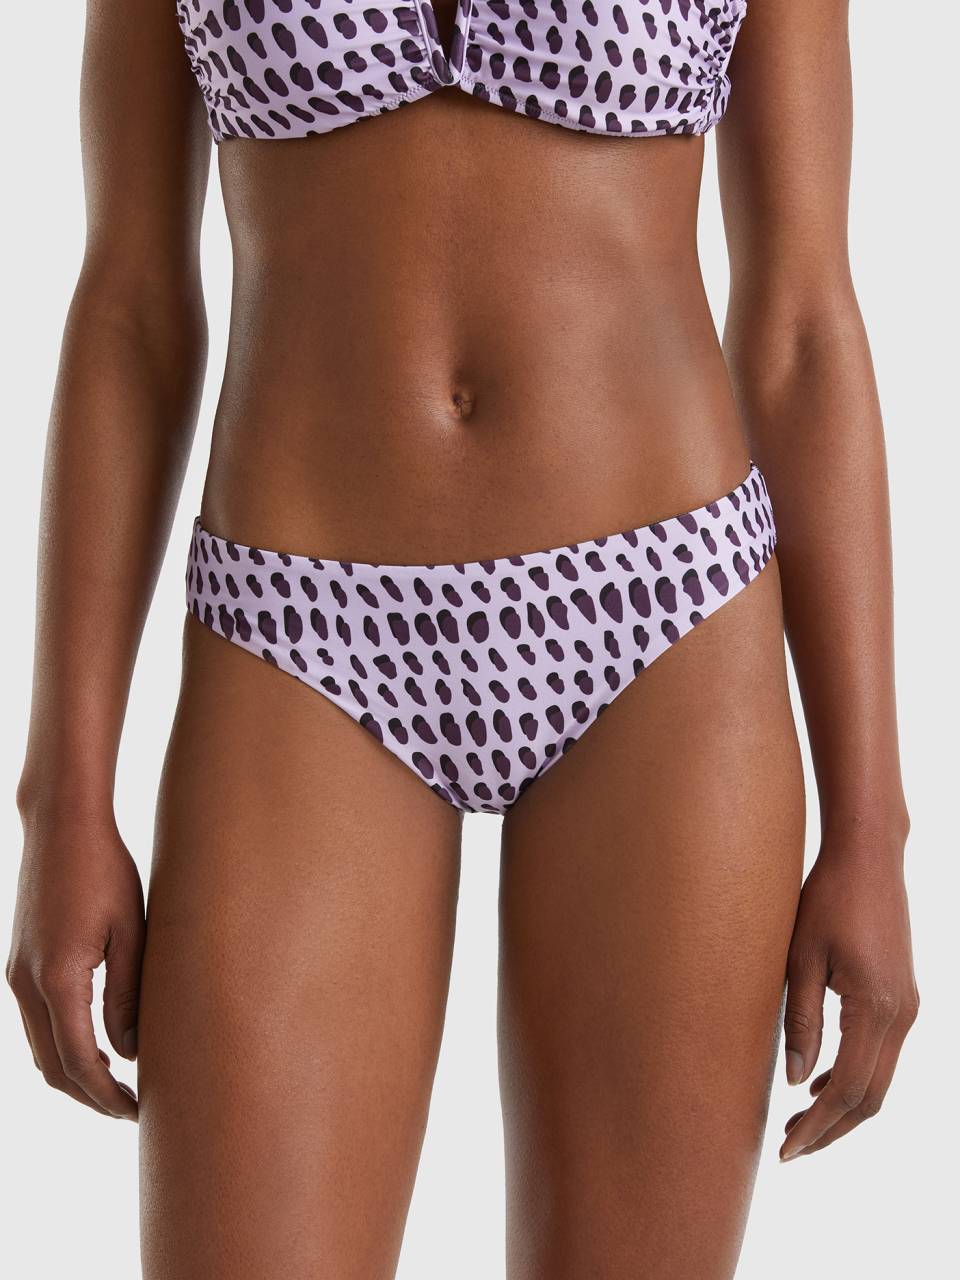 Benetton swim bottoms with spotted print. 1